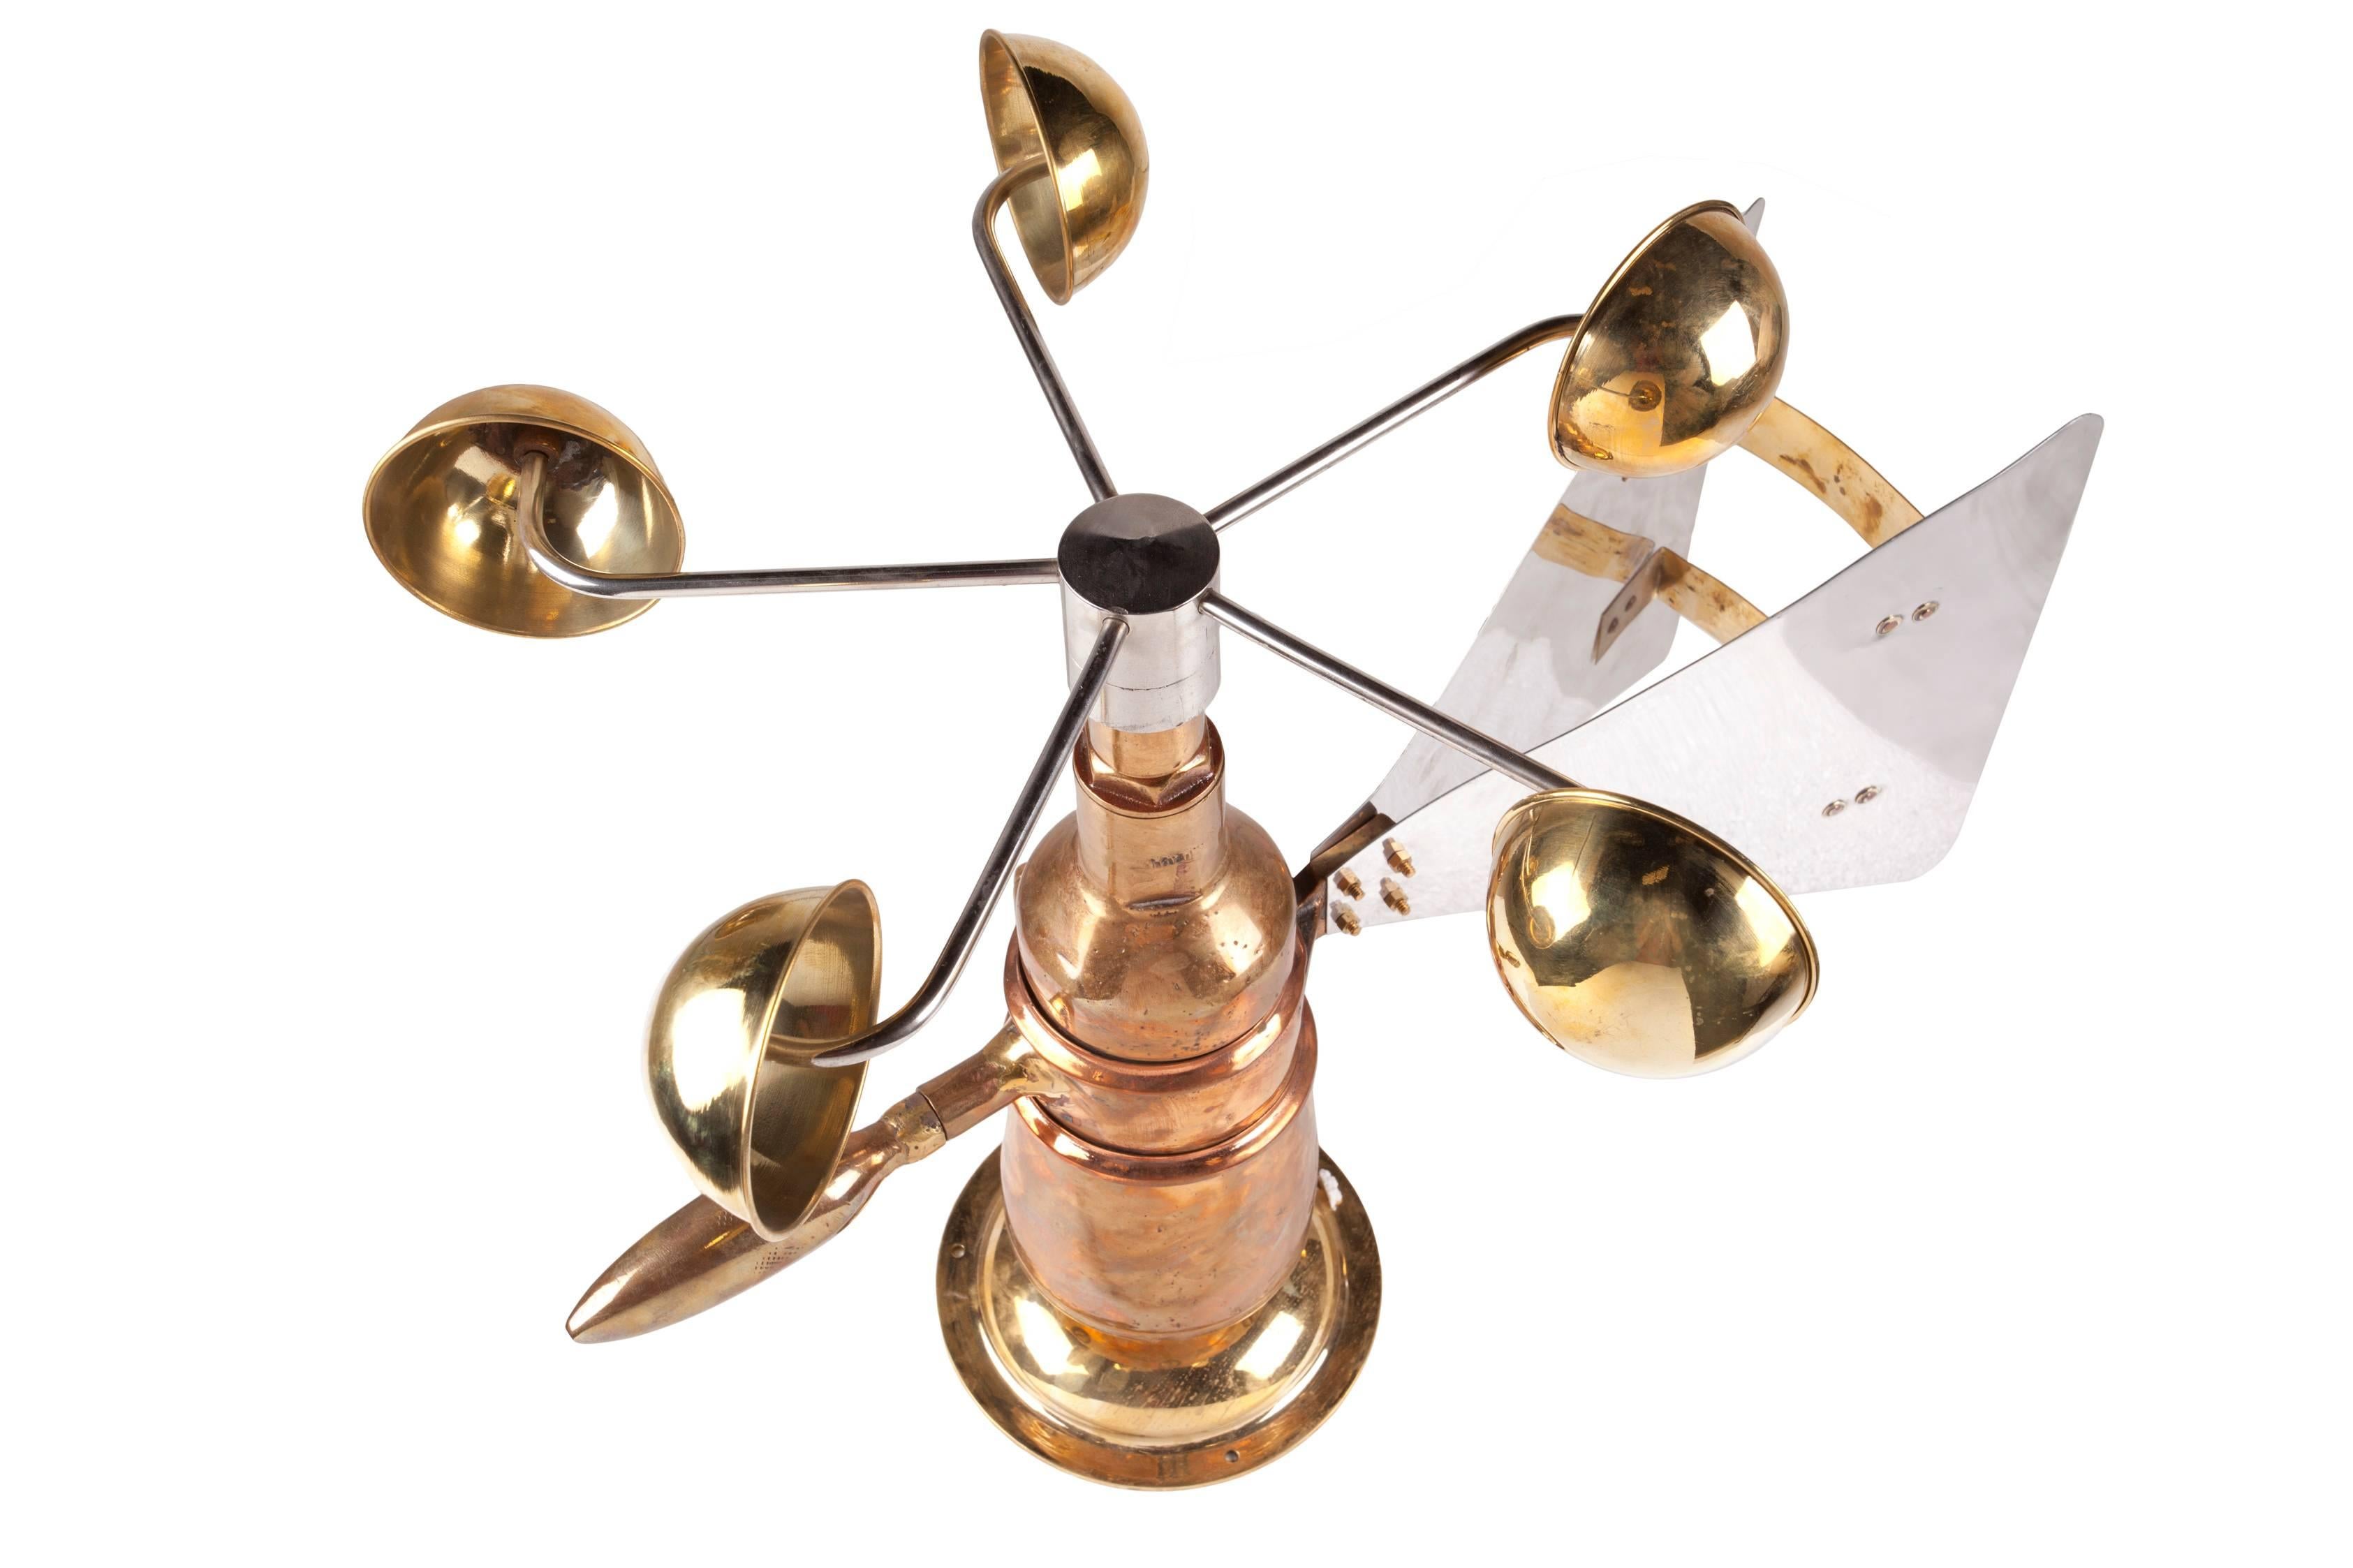 Midcentury Ship's Anemometer in brass with an aluminum fin. These were used outside on ships to measure wind speed and direction connected to a corresponding gauge on the bridge. This has great sculptural form and a rare find. The brass base has